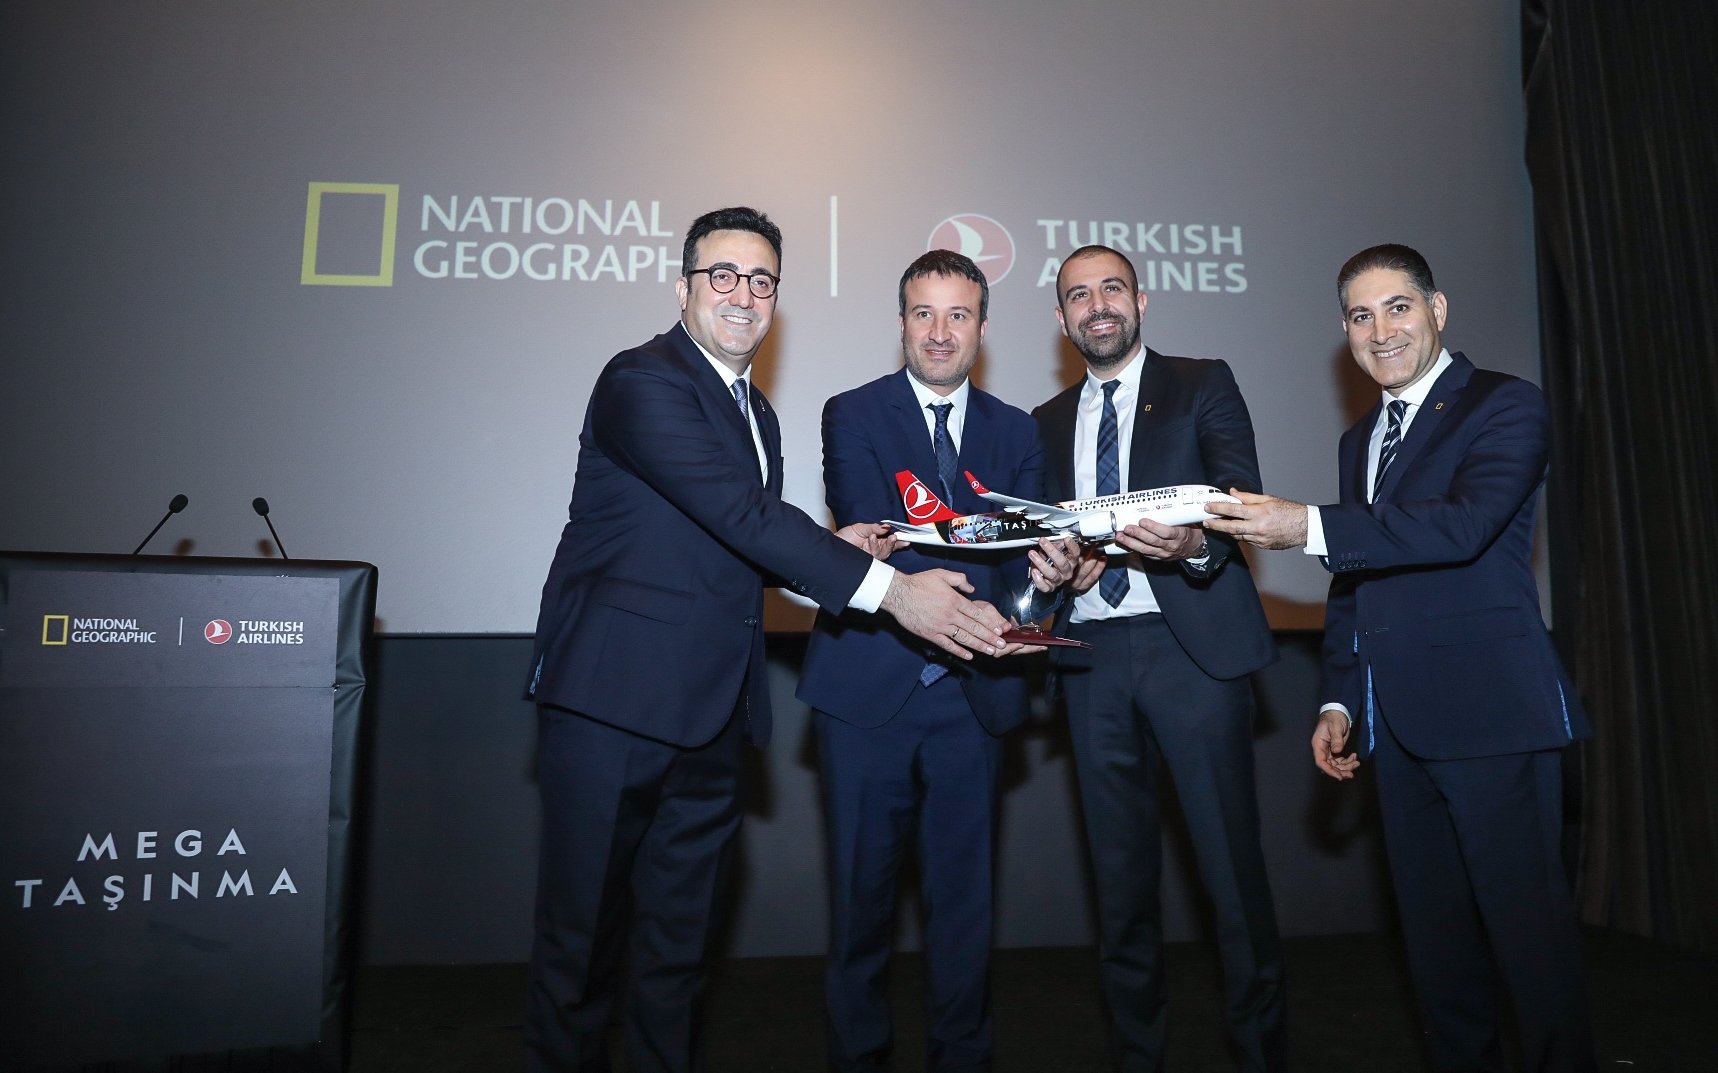 Turkish Airlines (THY) Chairperson of the Board Ilker Aycı (L) and other officials during the premiere of 'The Great Move' documentary, Istanbul, Turkey, Jan. 12, 2021. (DHA Photo)